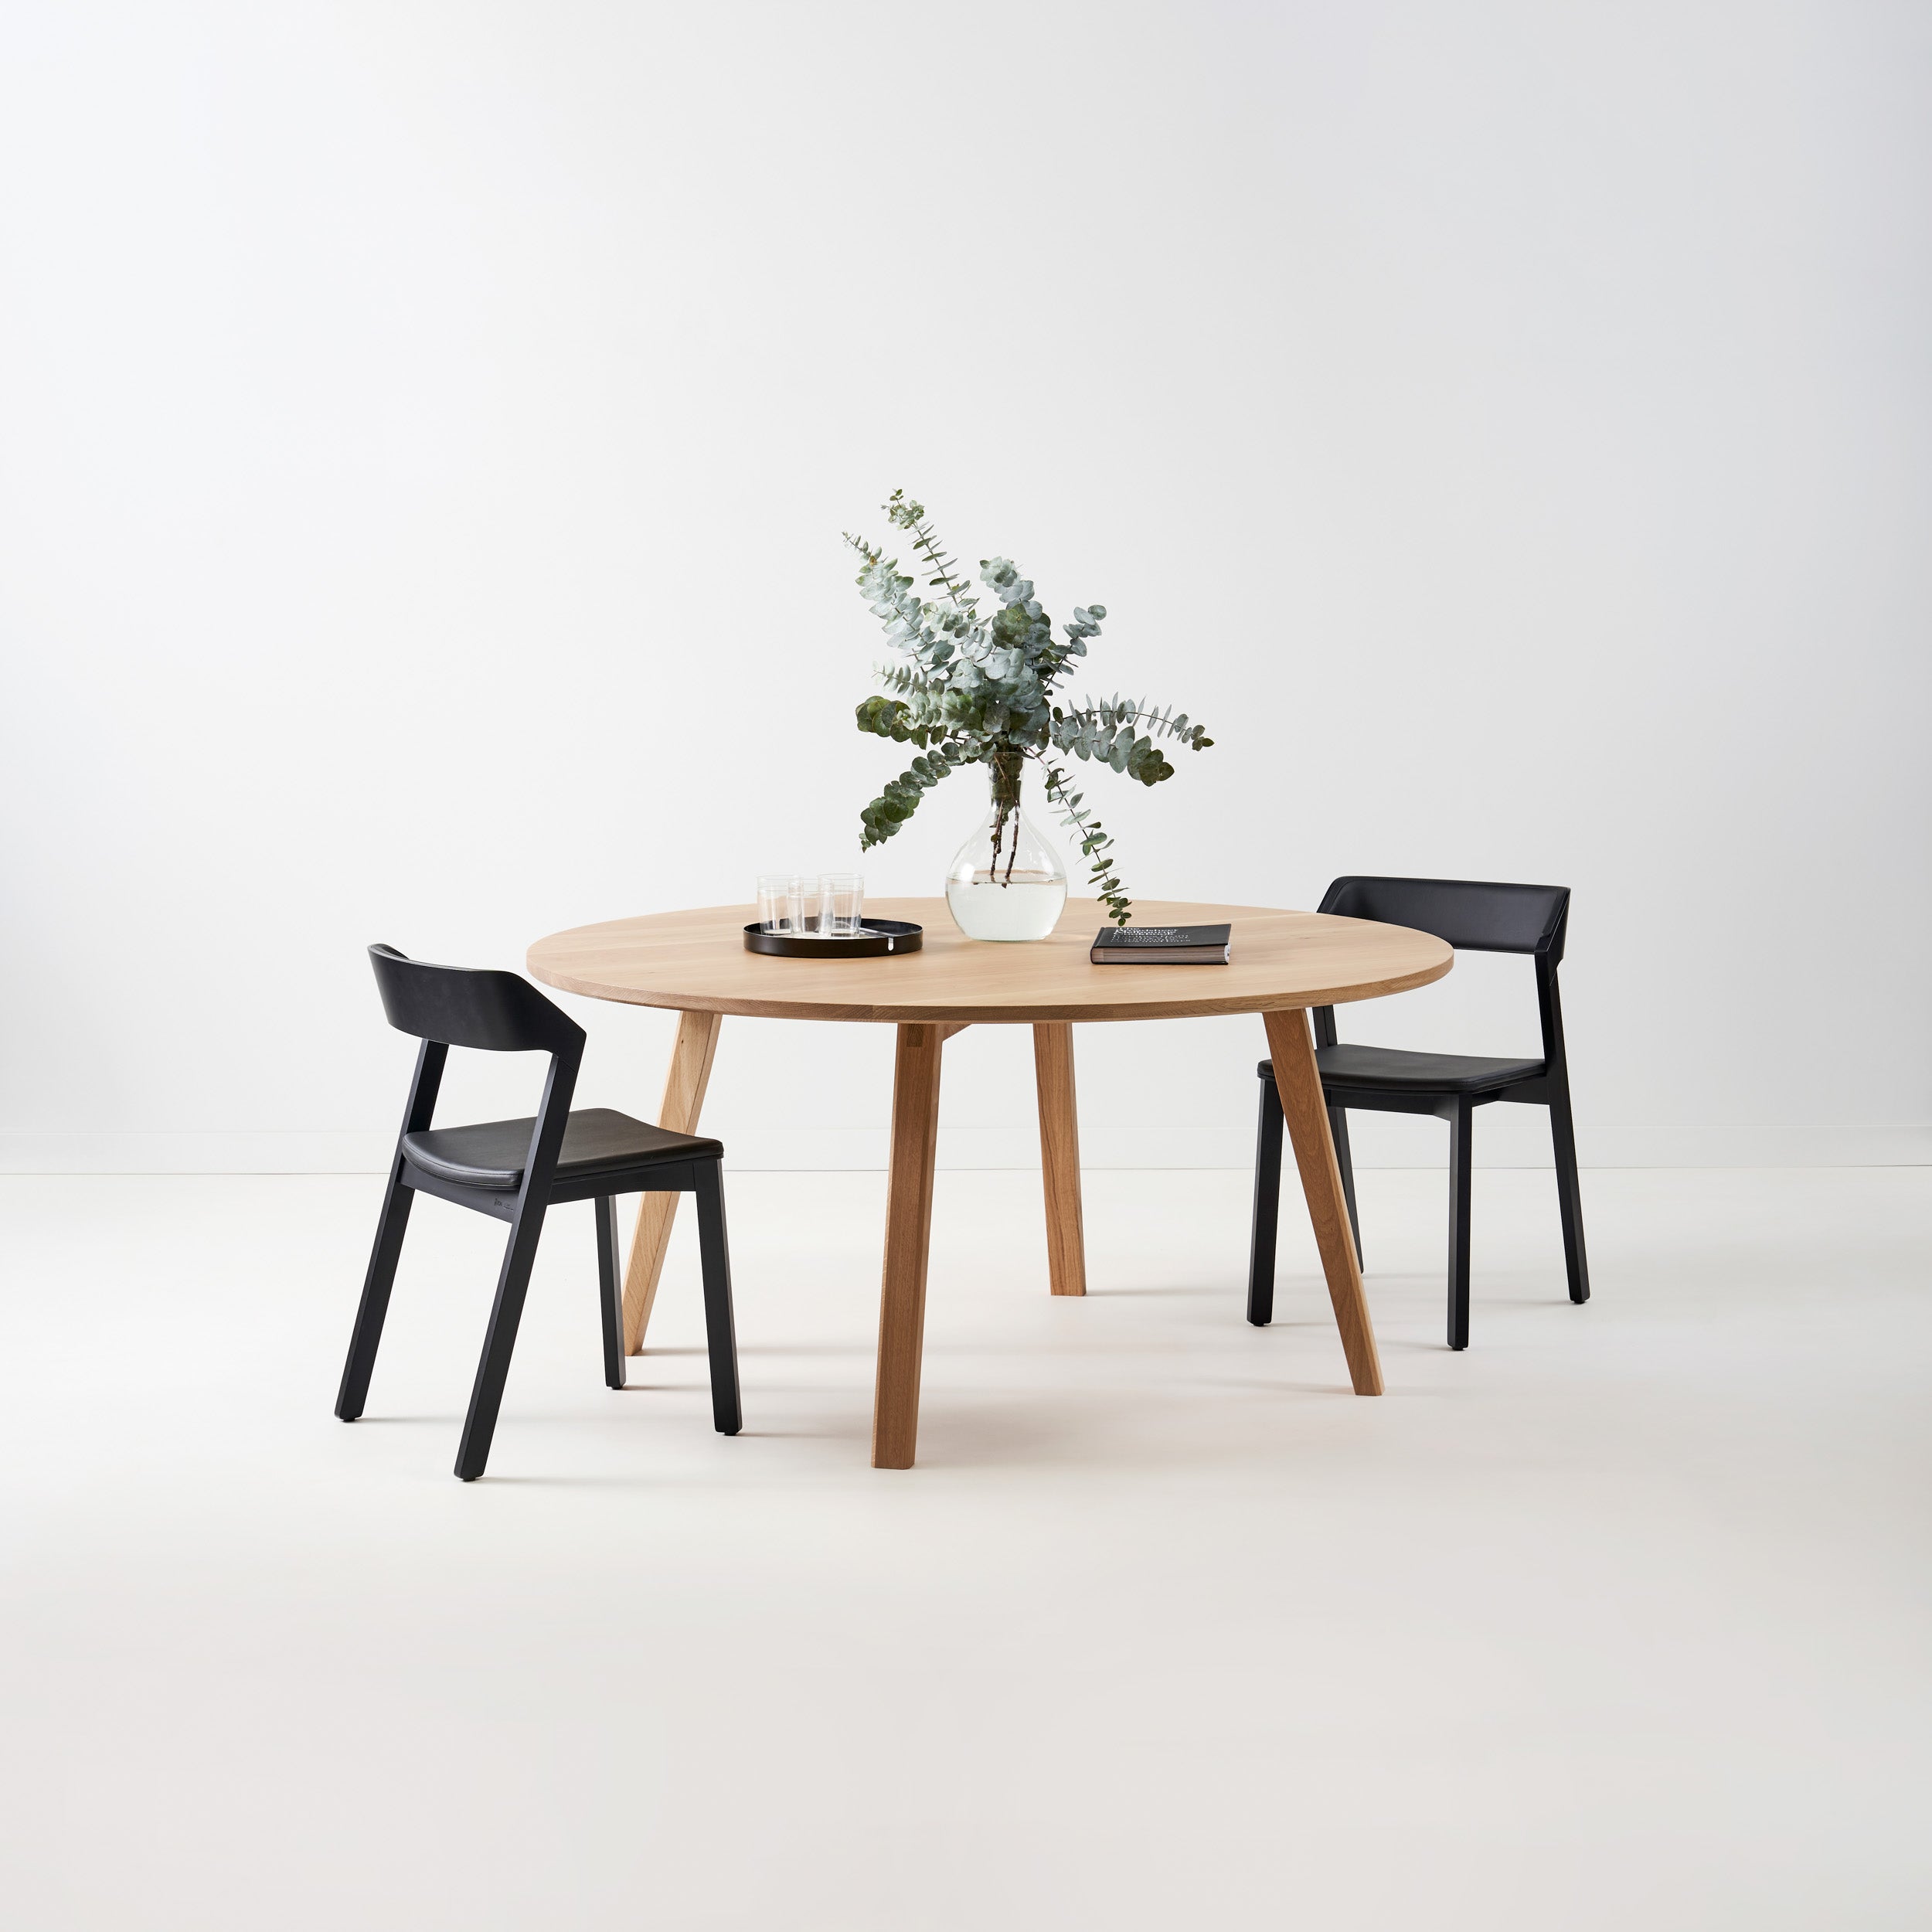 What’s the ideal round dining table size?